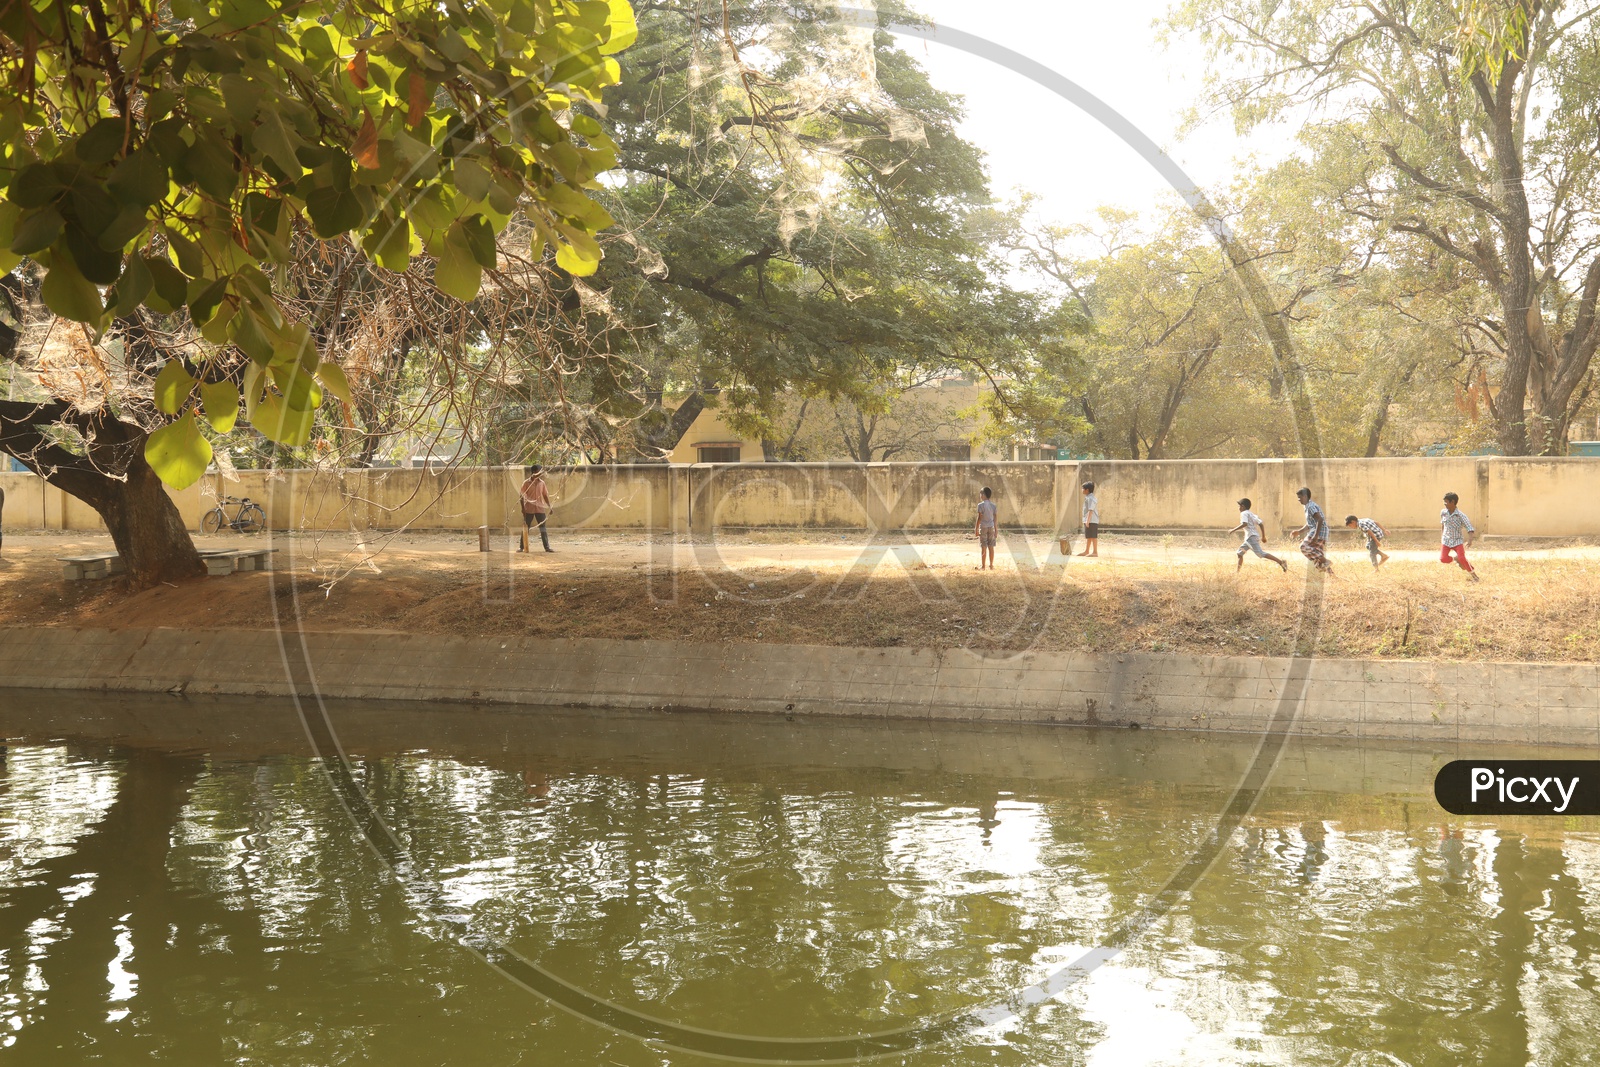 Children playing cricket beside a water canal